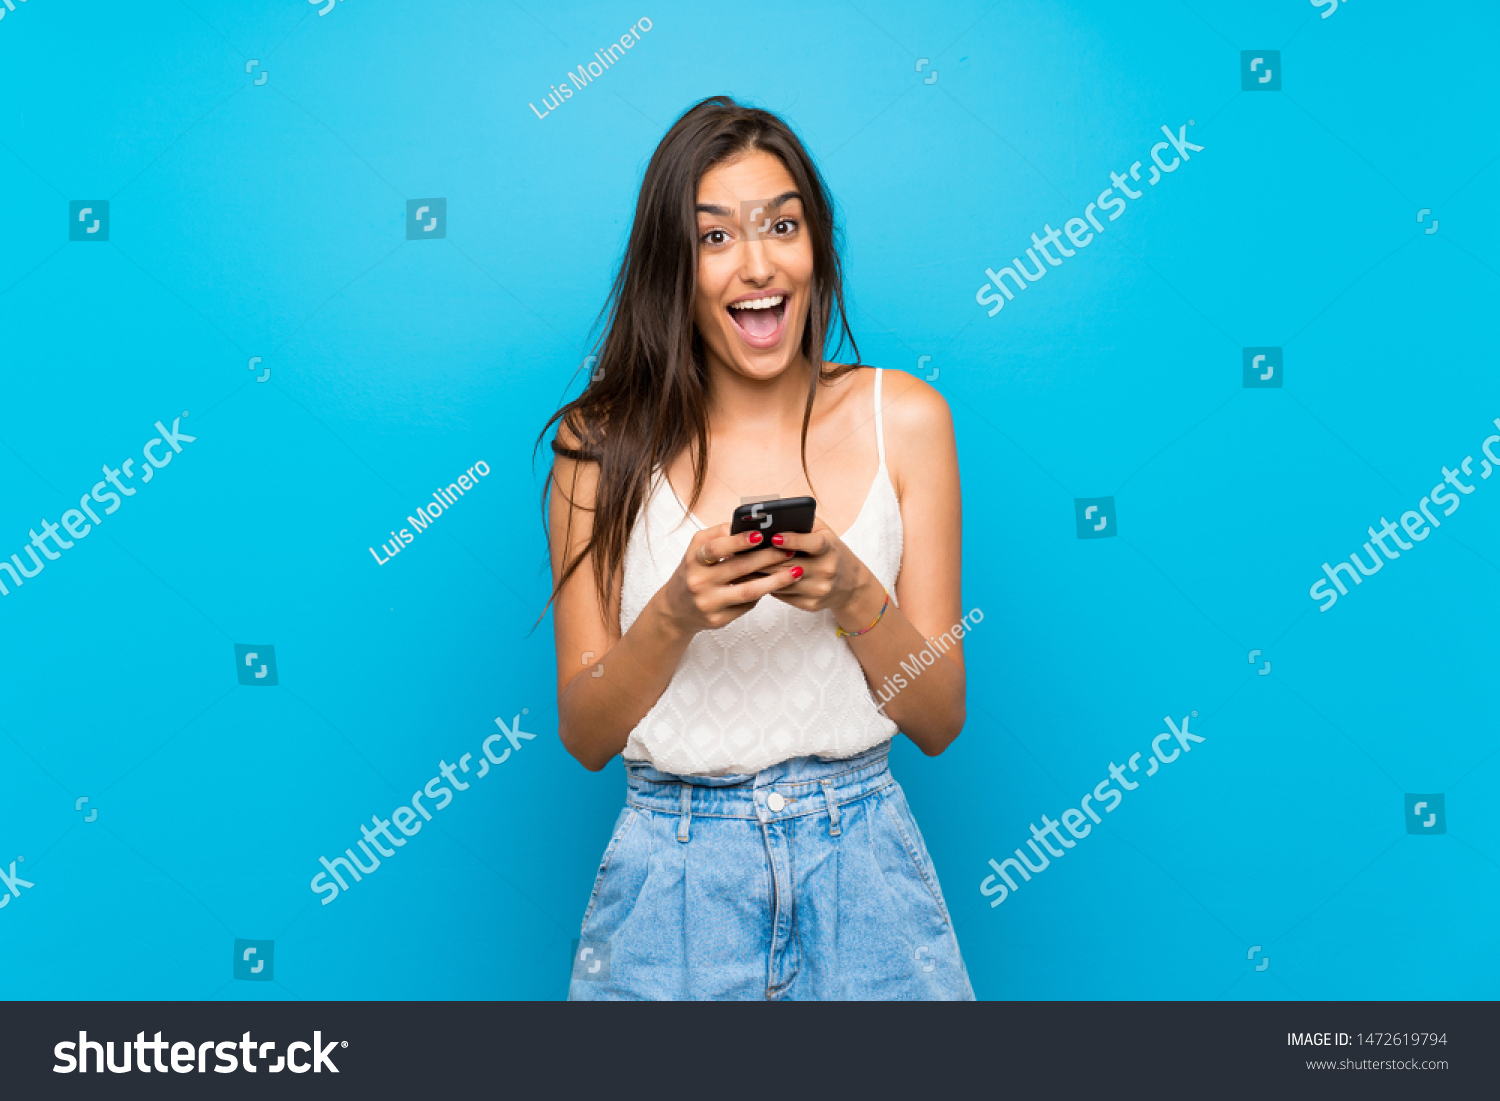 Young woman over isolated blue background surprised and sending a message #1472619794